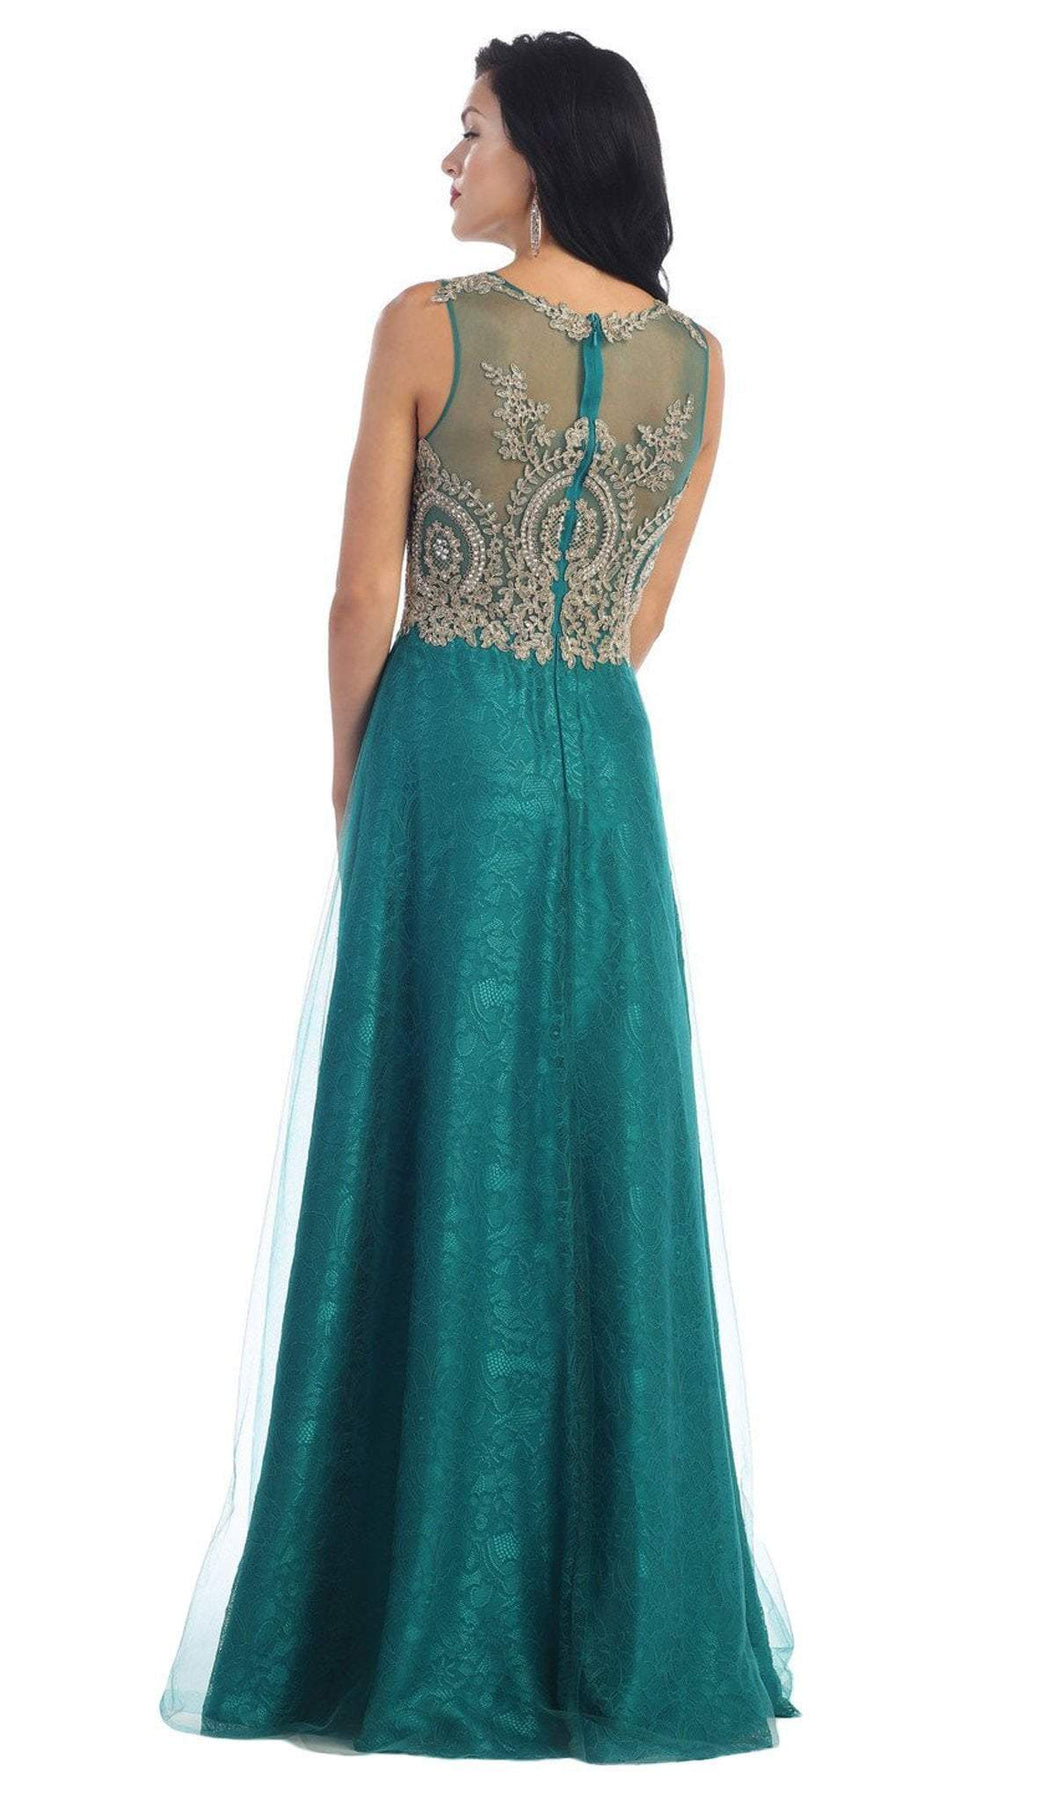 May Queen - Elegant Beaded Bateau Neck A-Line Evening Dress Special Occasion Dress